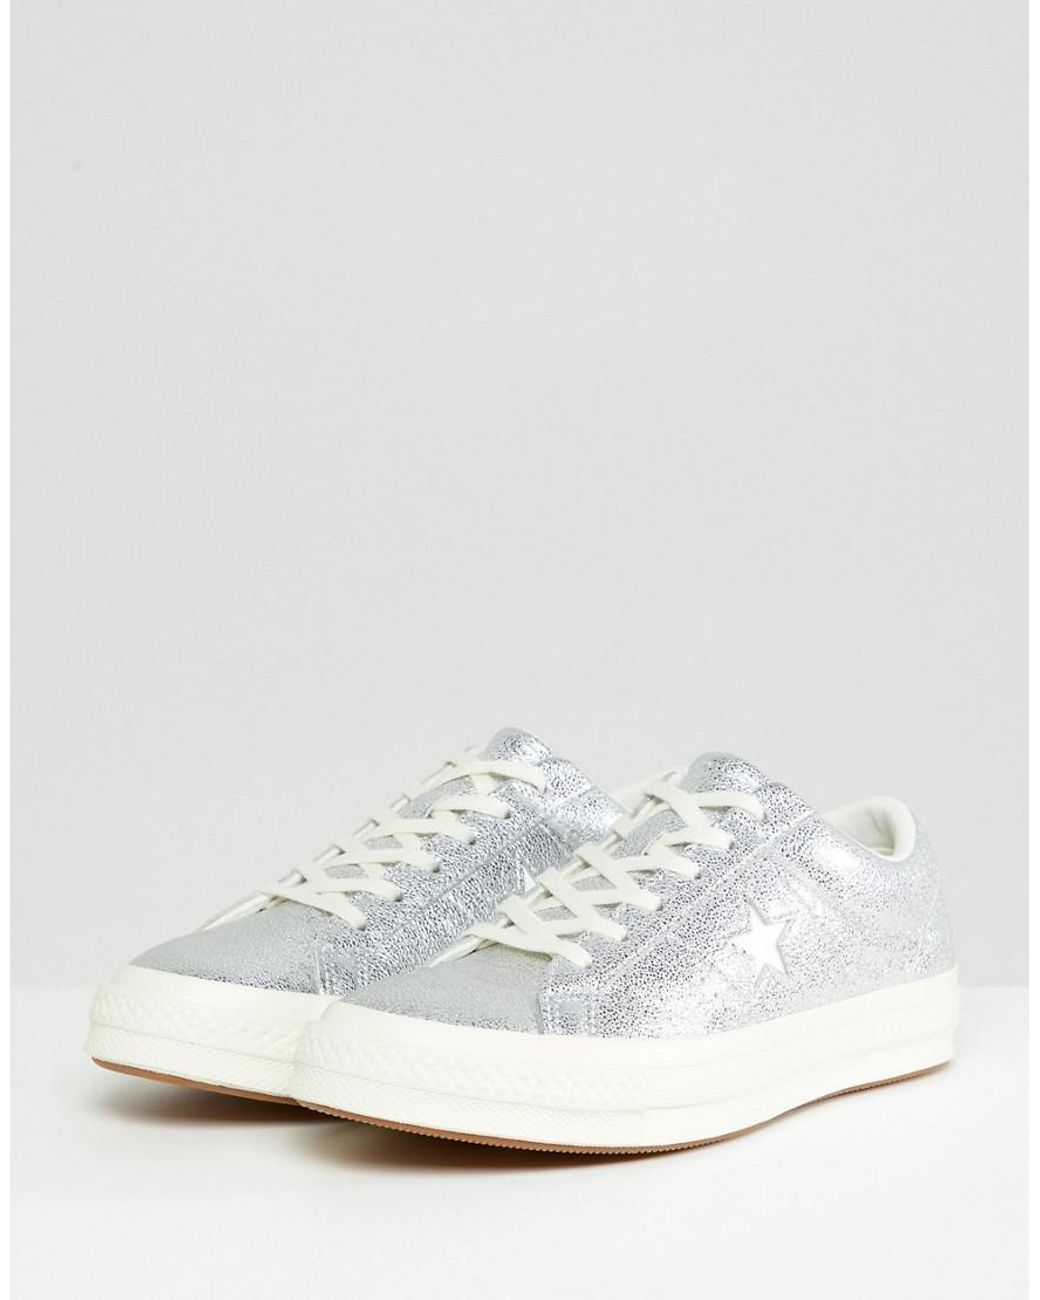 Converse One Star Ox Trainer In Silver in Metallic | Lyst UK